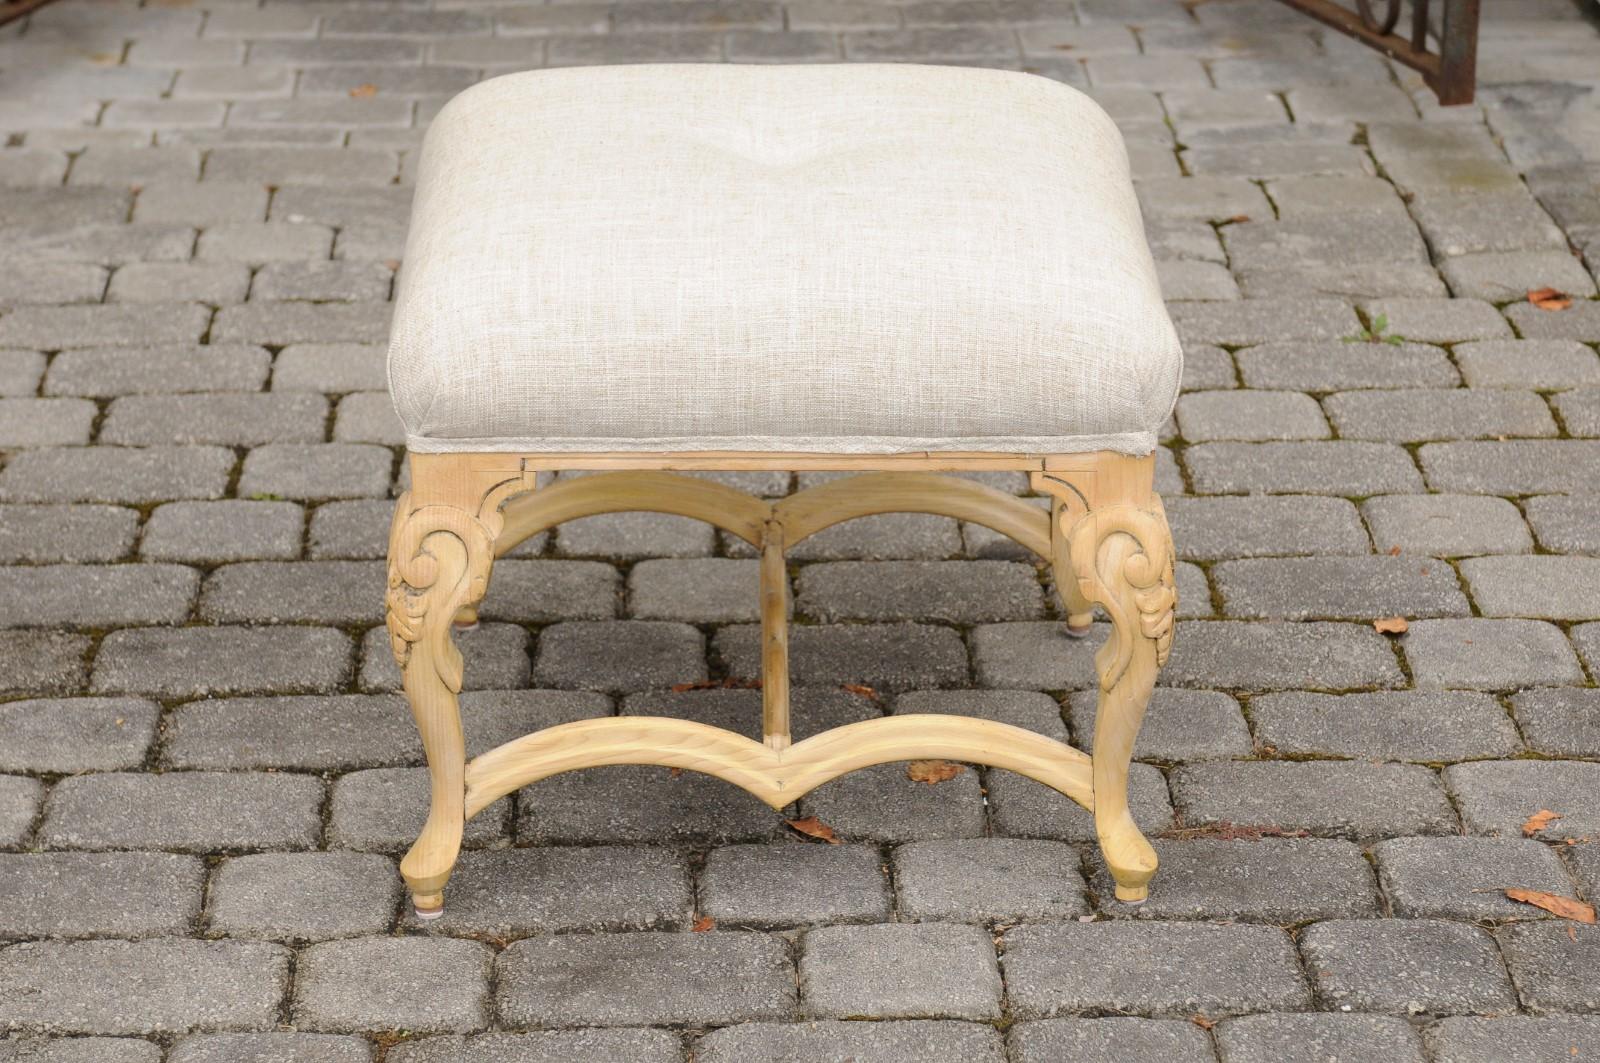 1950s Vintage Italian Rococo Style Ottoman with Cabriole Legs and New Upholstery (20. Jahrhundert)